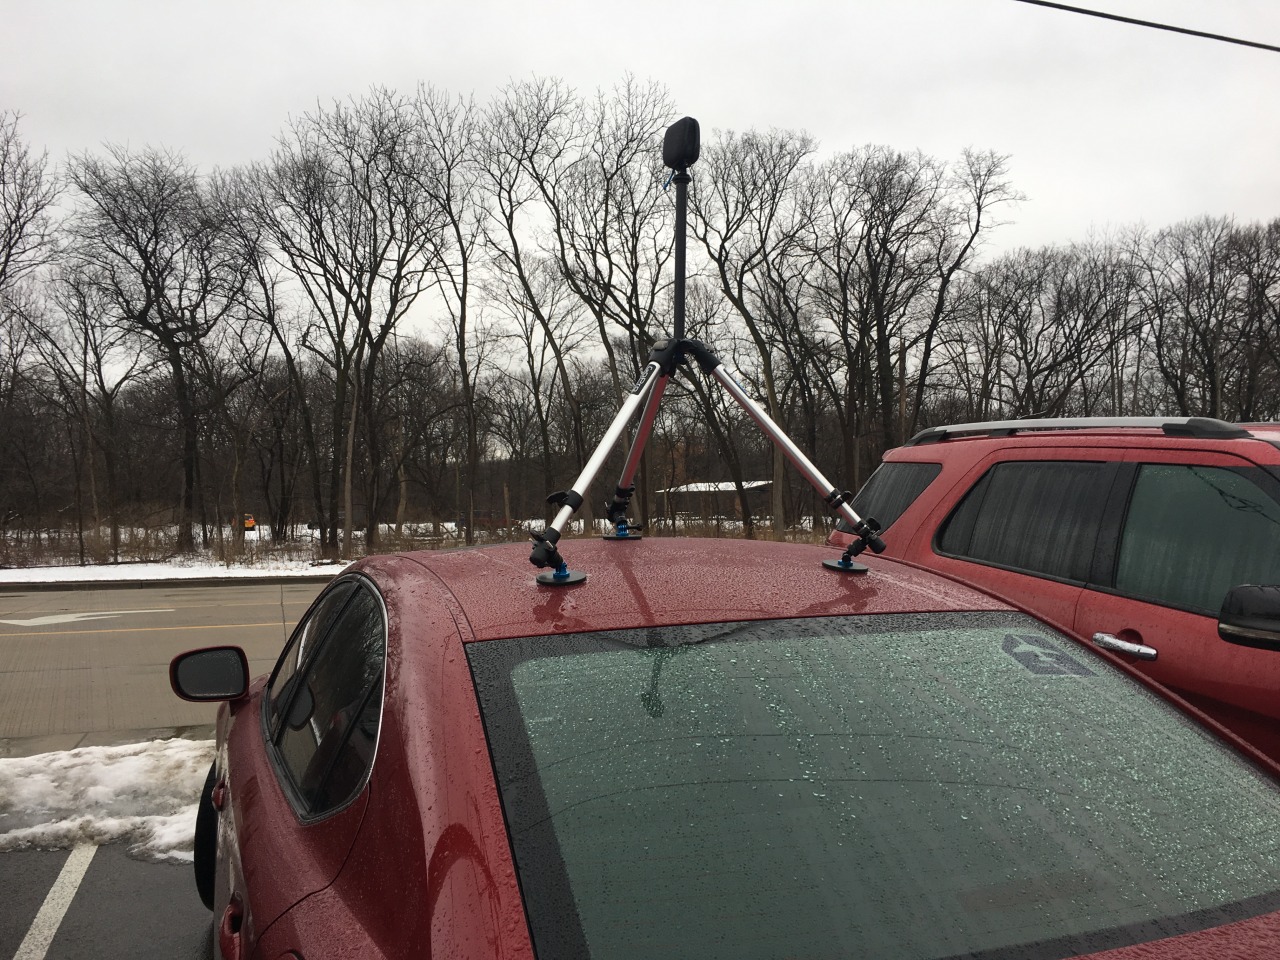 TrailBlazer - How to Mount Your GoPro Fusion to a Car